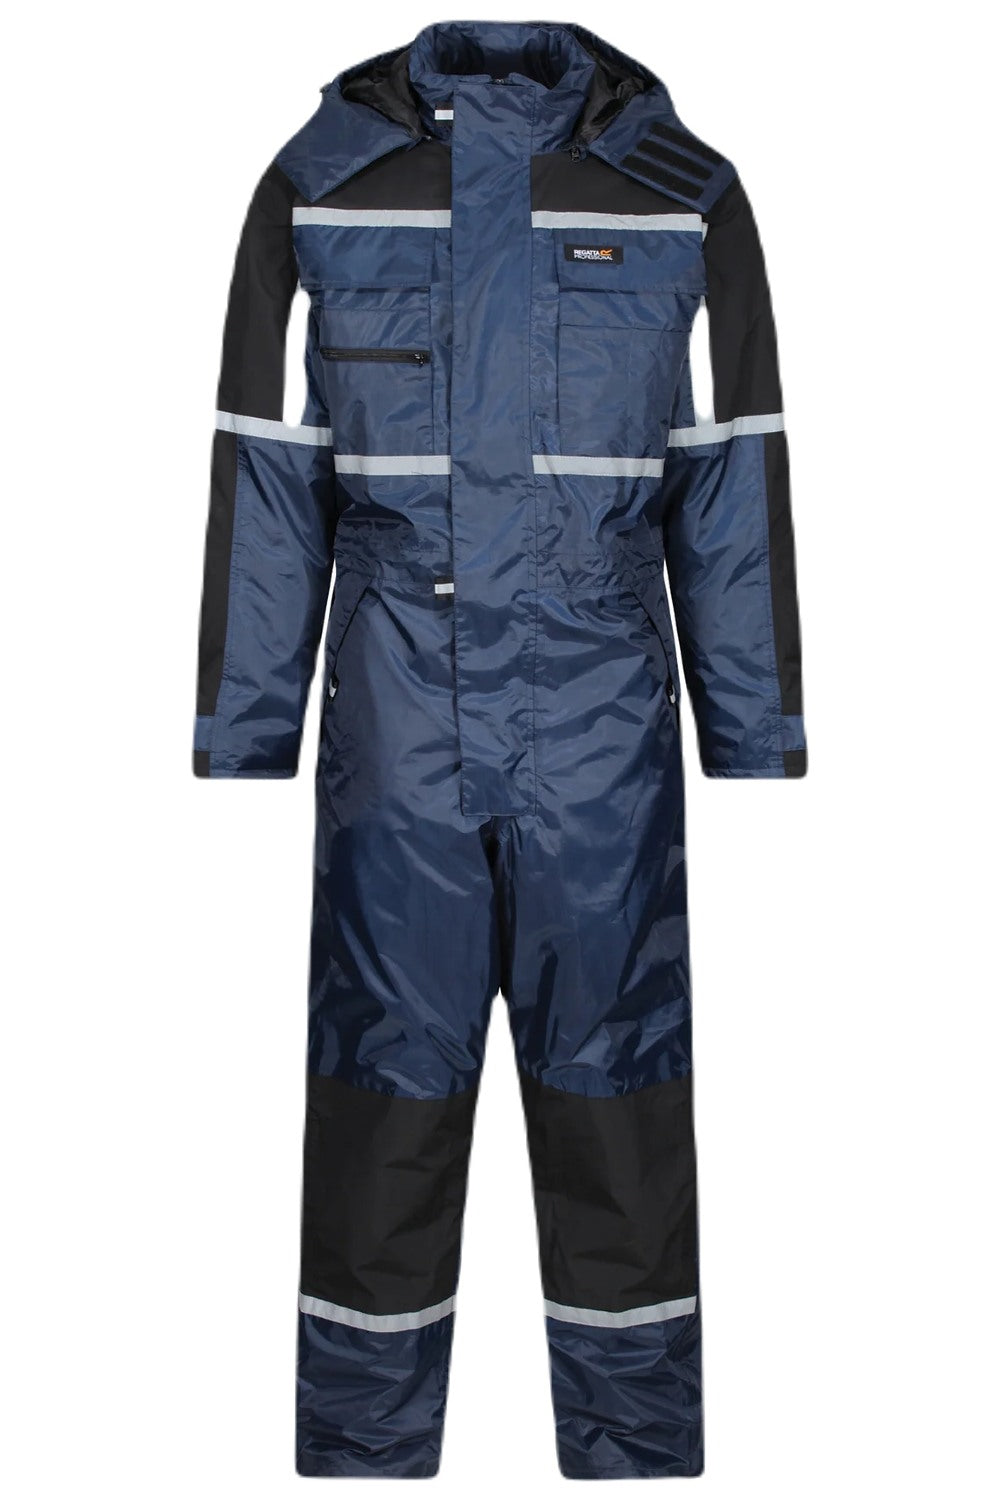 Regatta Pro Waterproof Insulated Coverall in Navy 